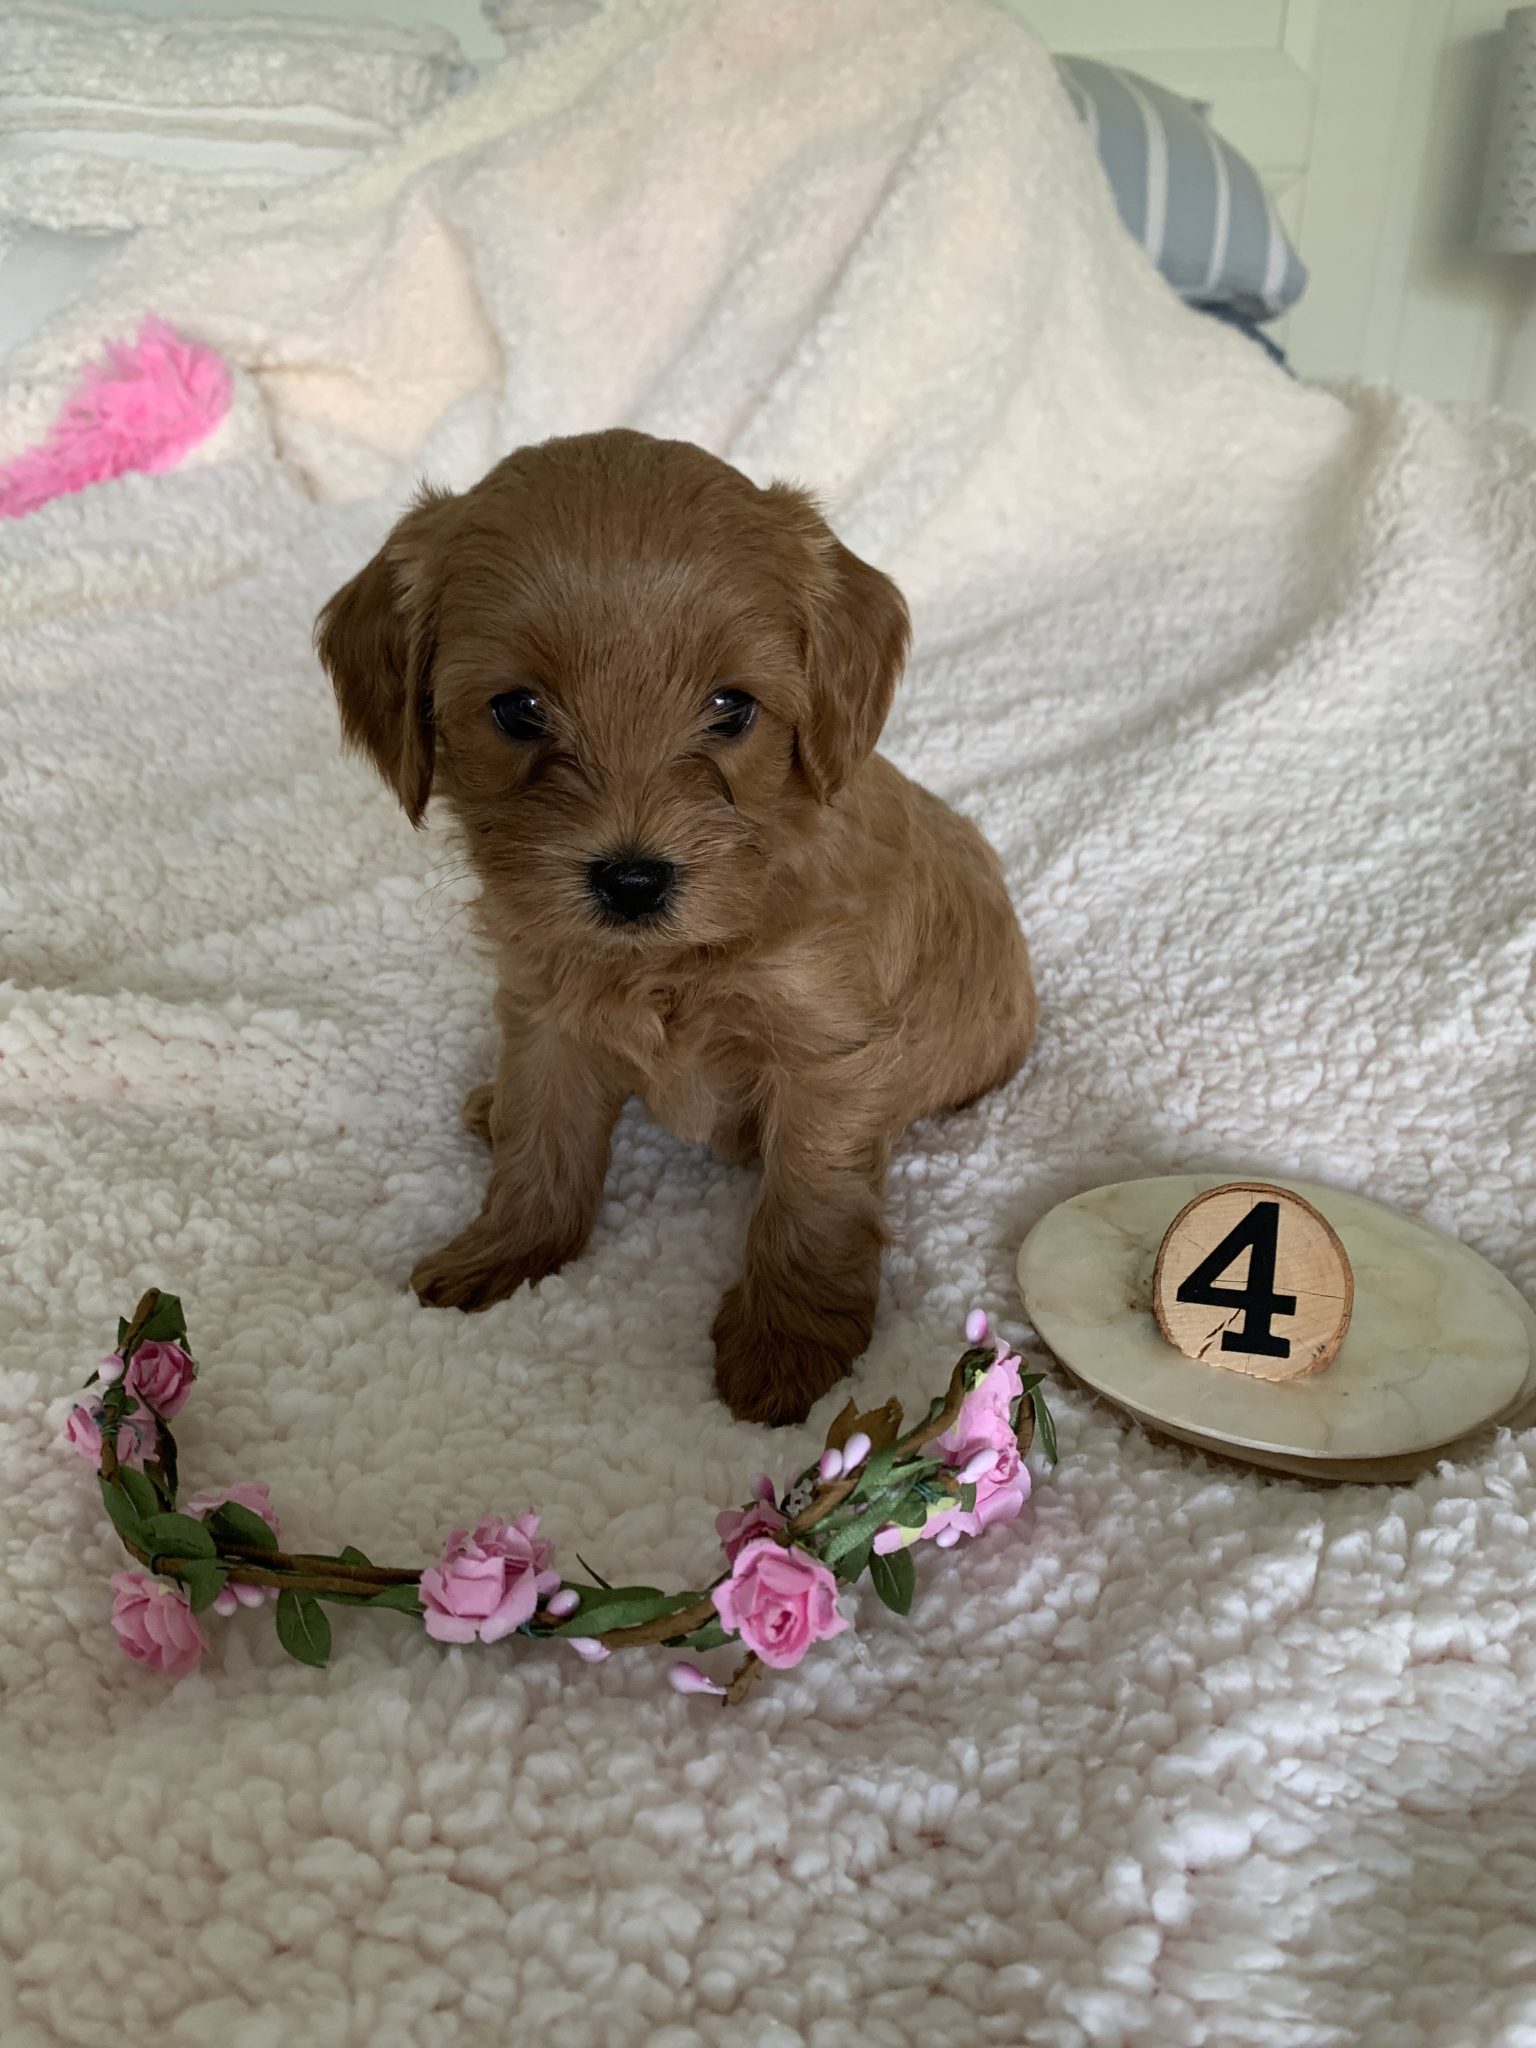 TEDDYBEAR TOY CAVOODLE PUPPIES DNA CLEARED